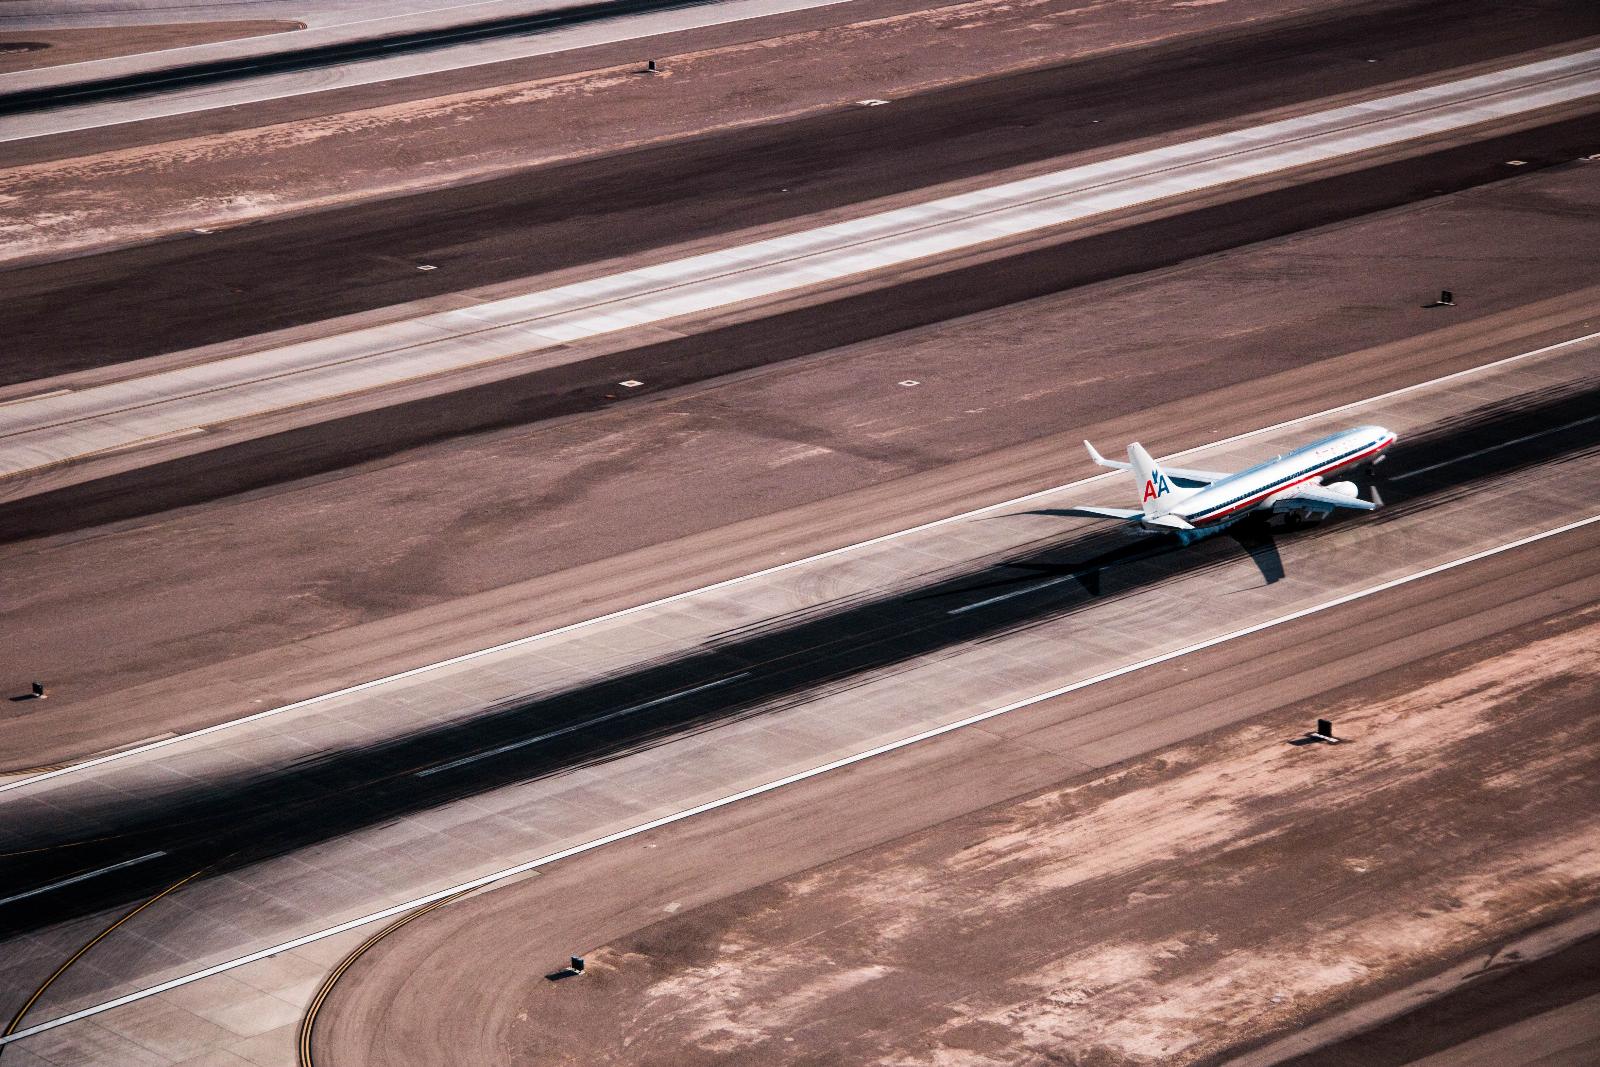 Why Planes Almost Never Crash on Runways